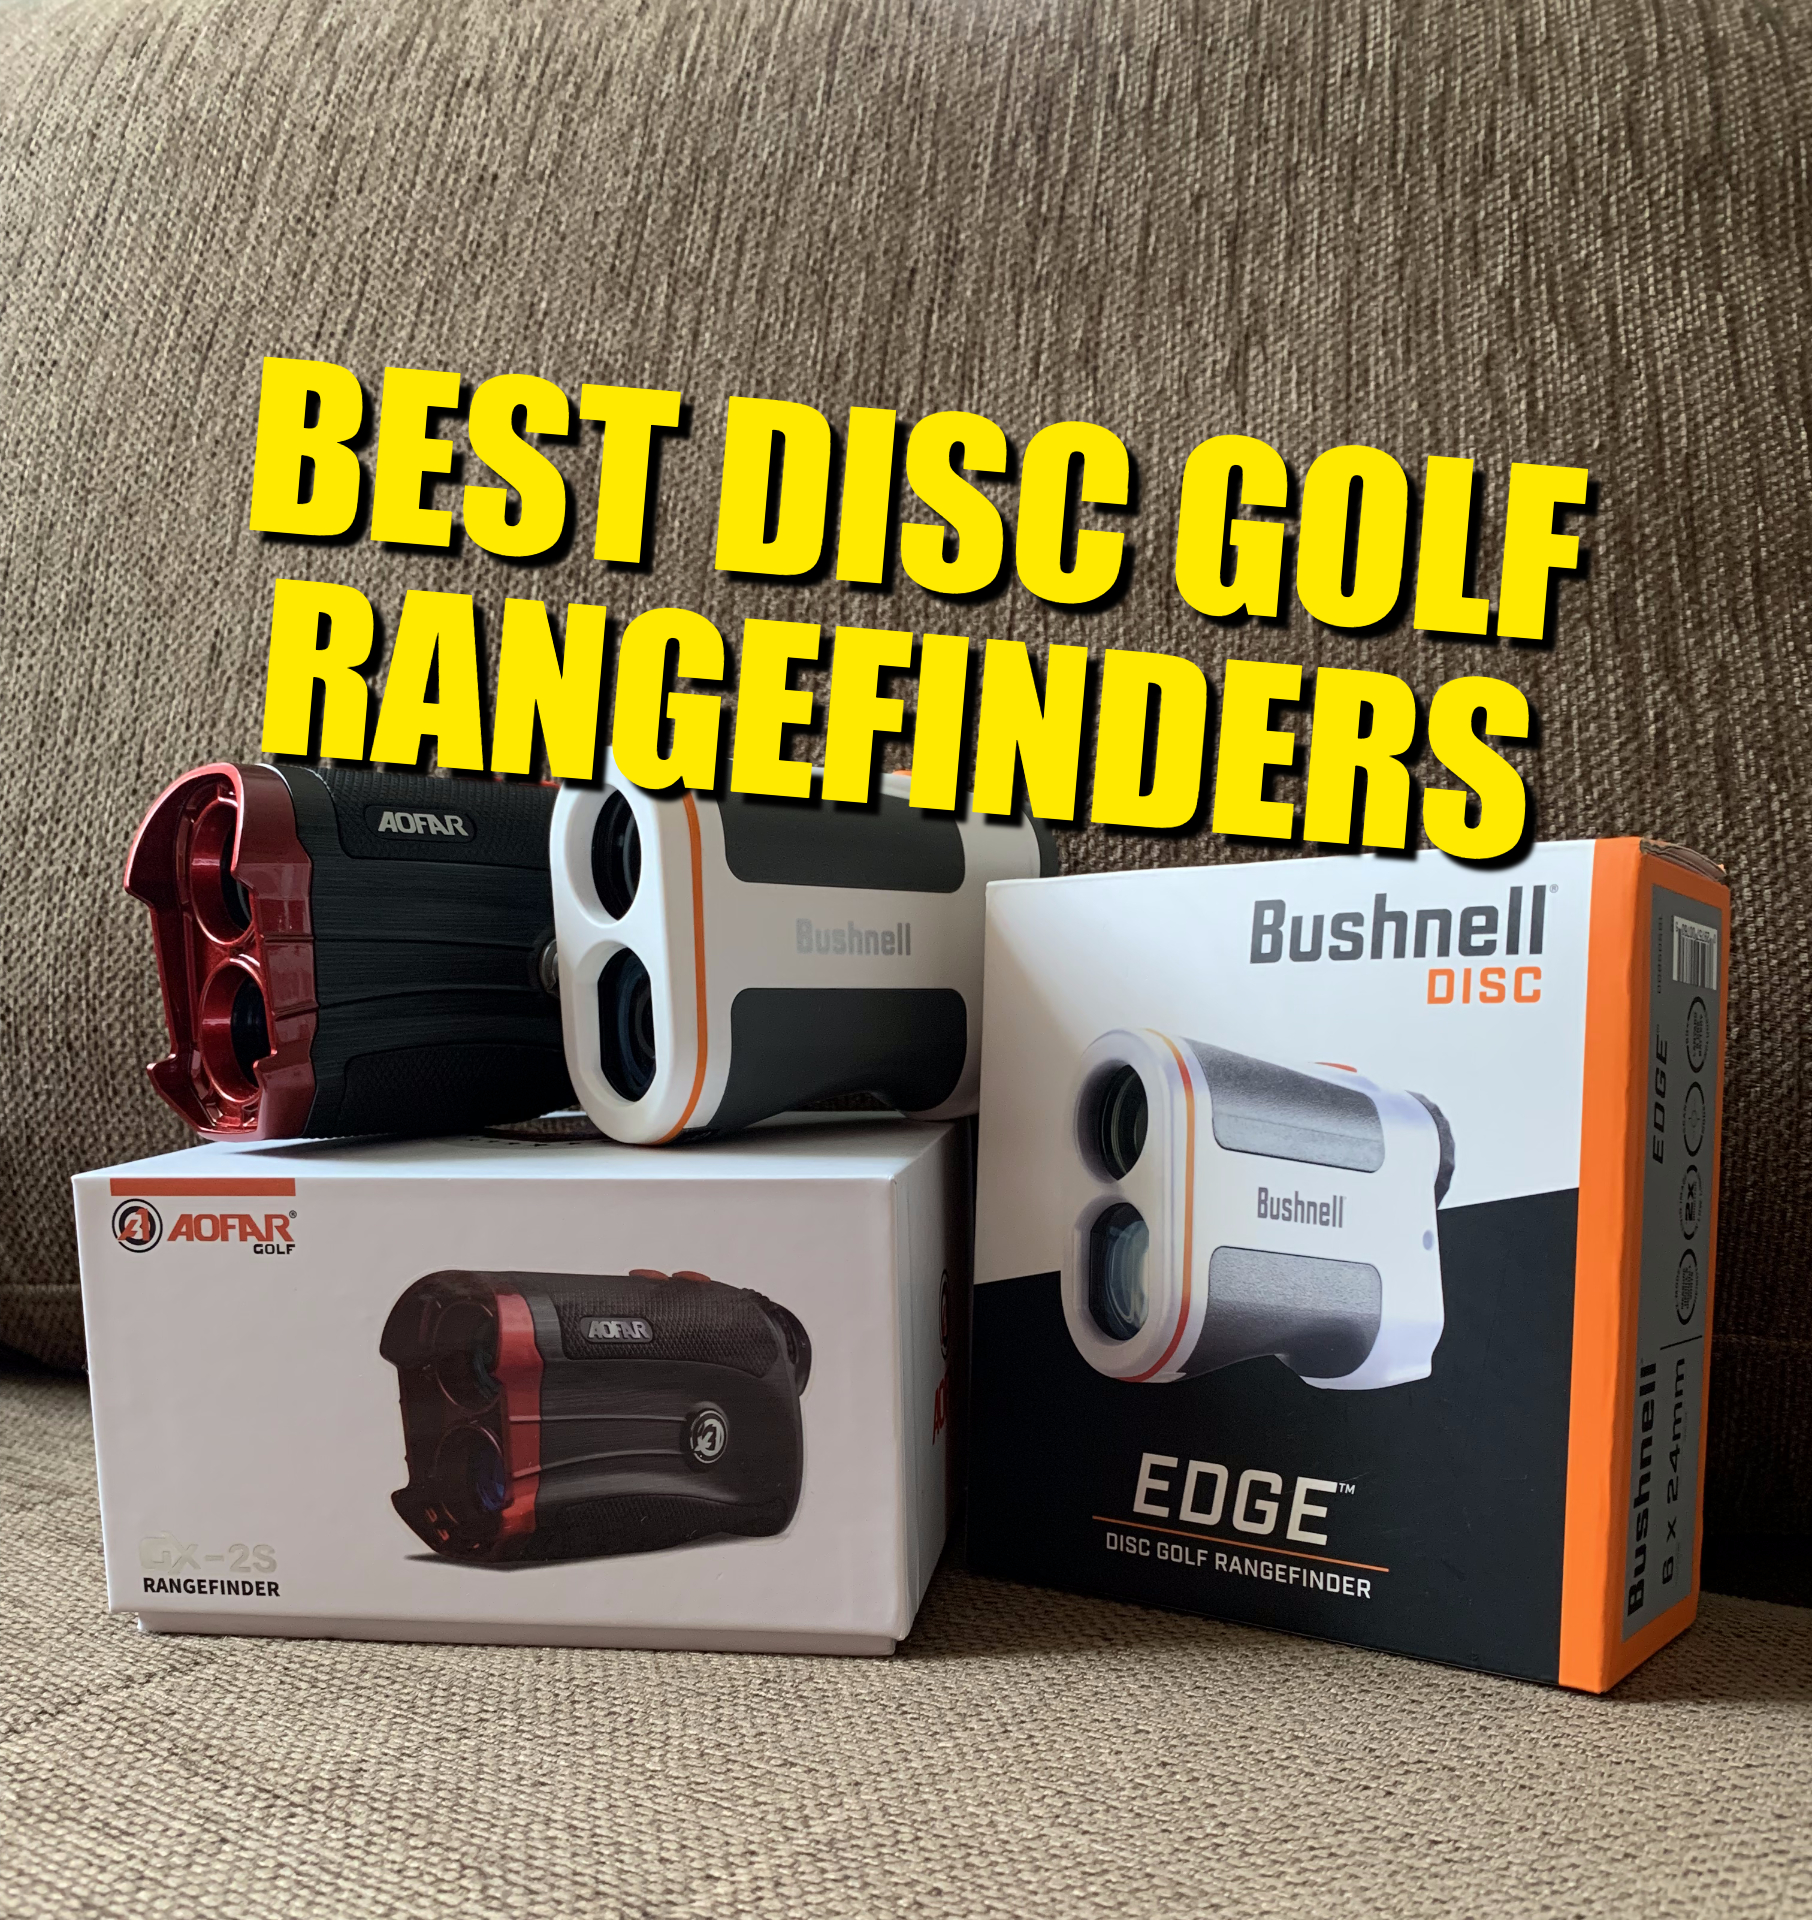 Disc golf rangefinders, what are the best ones